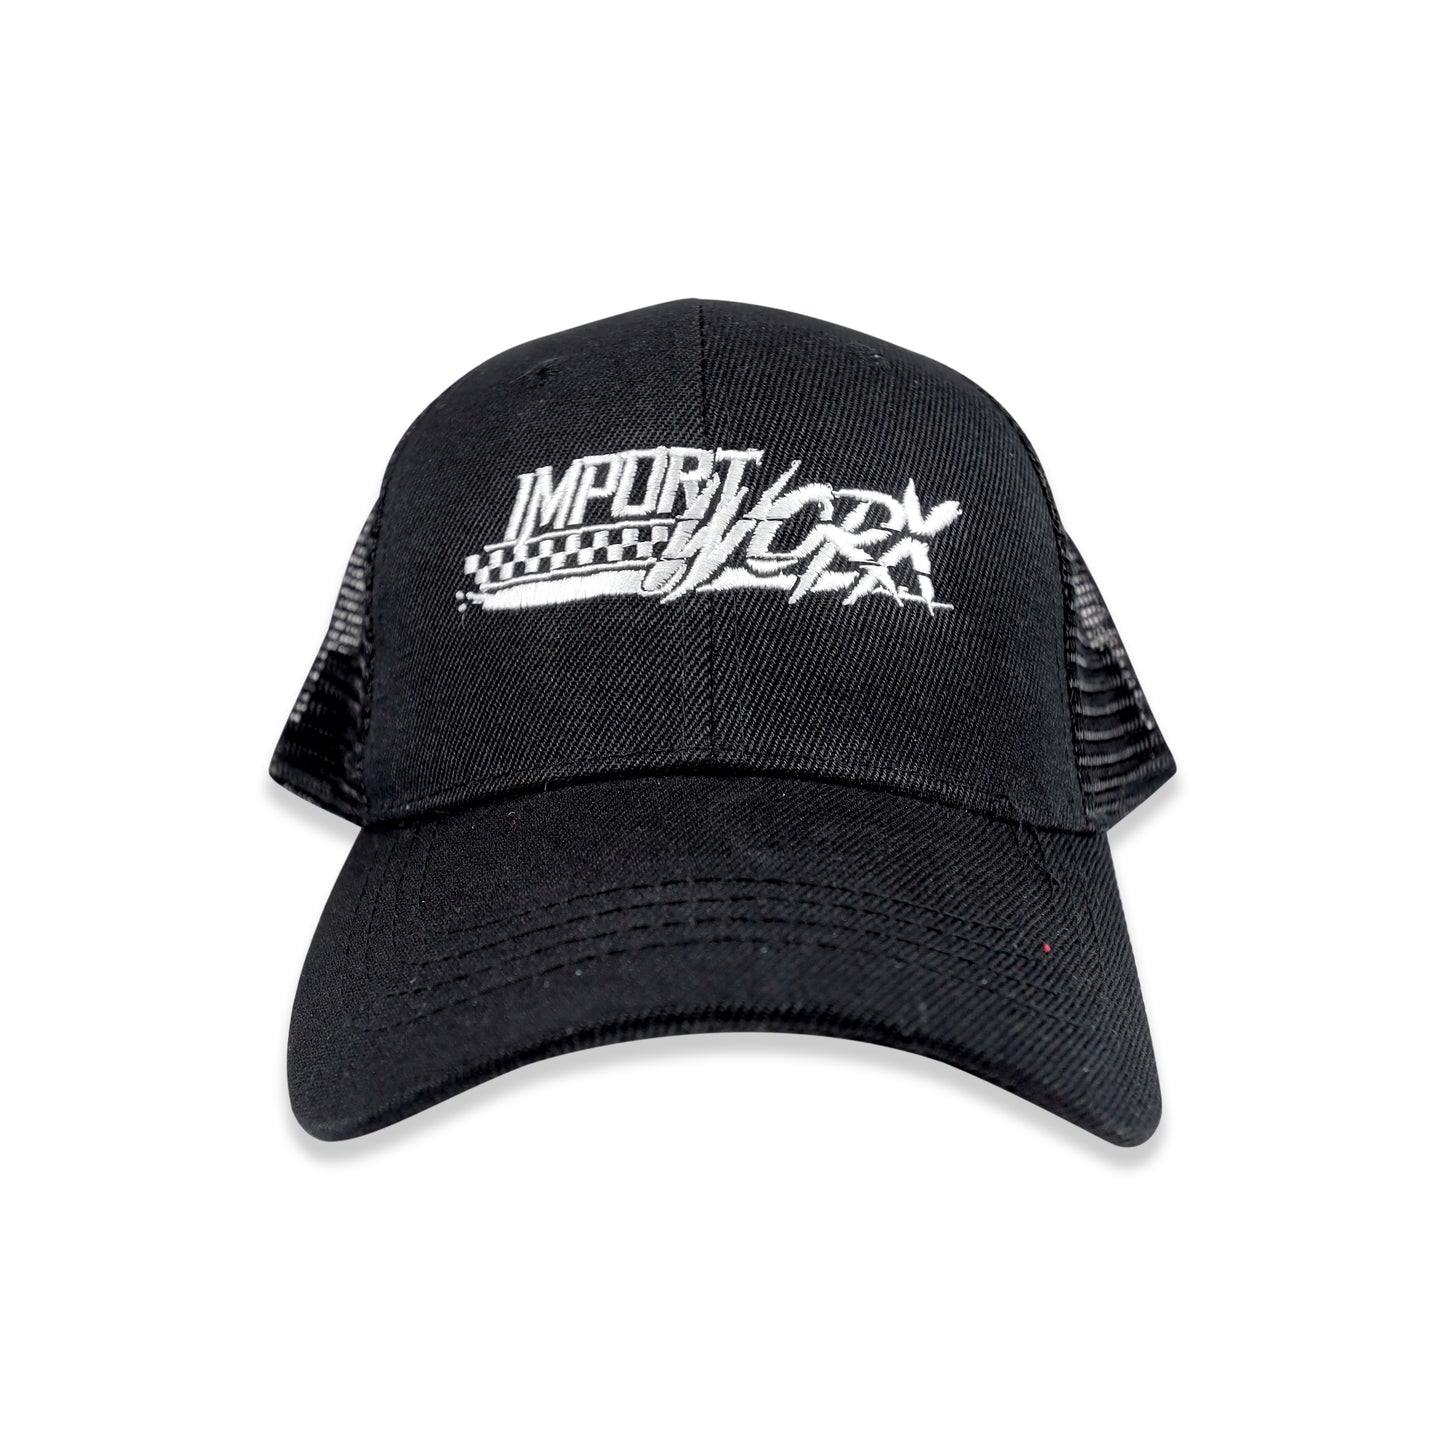 ImportWorx Embroidered Checkered Snapback Trucker Hat